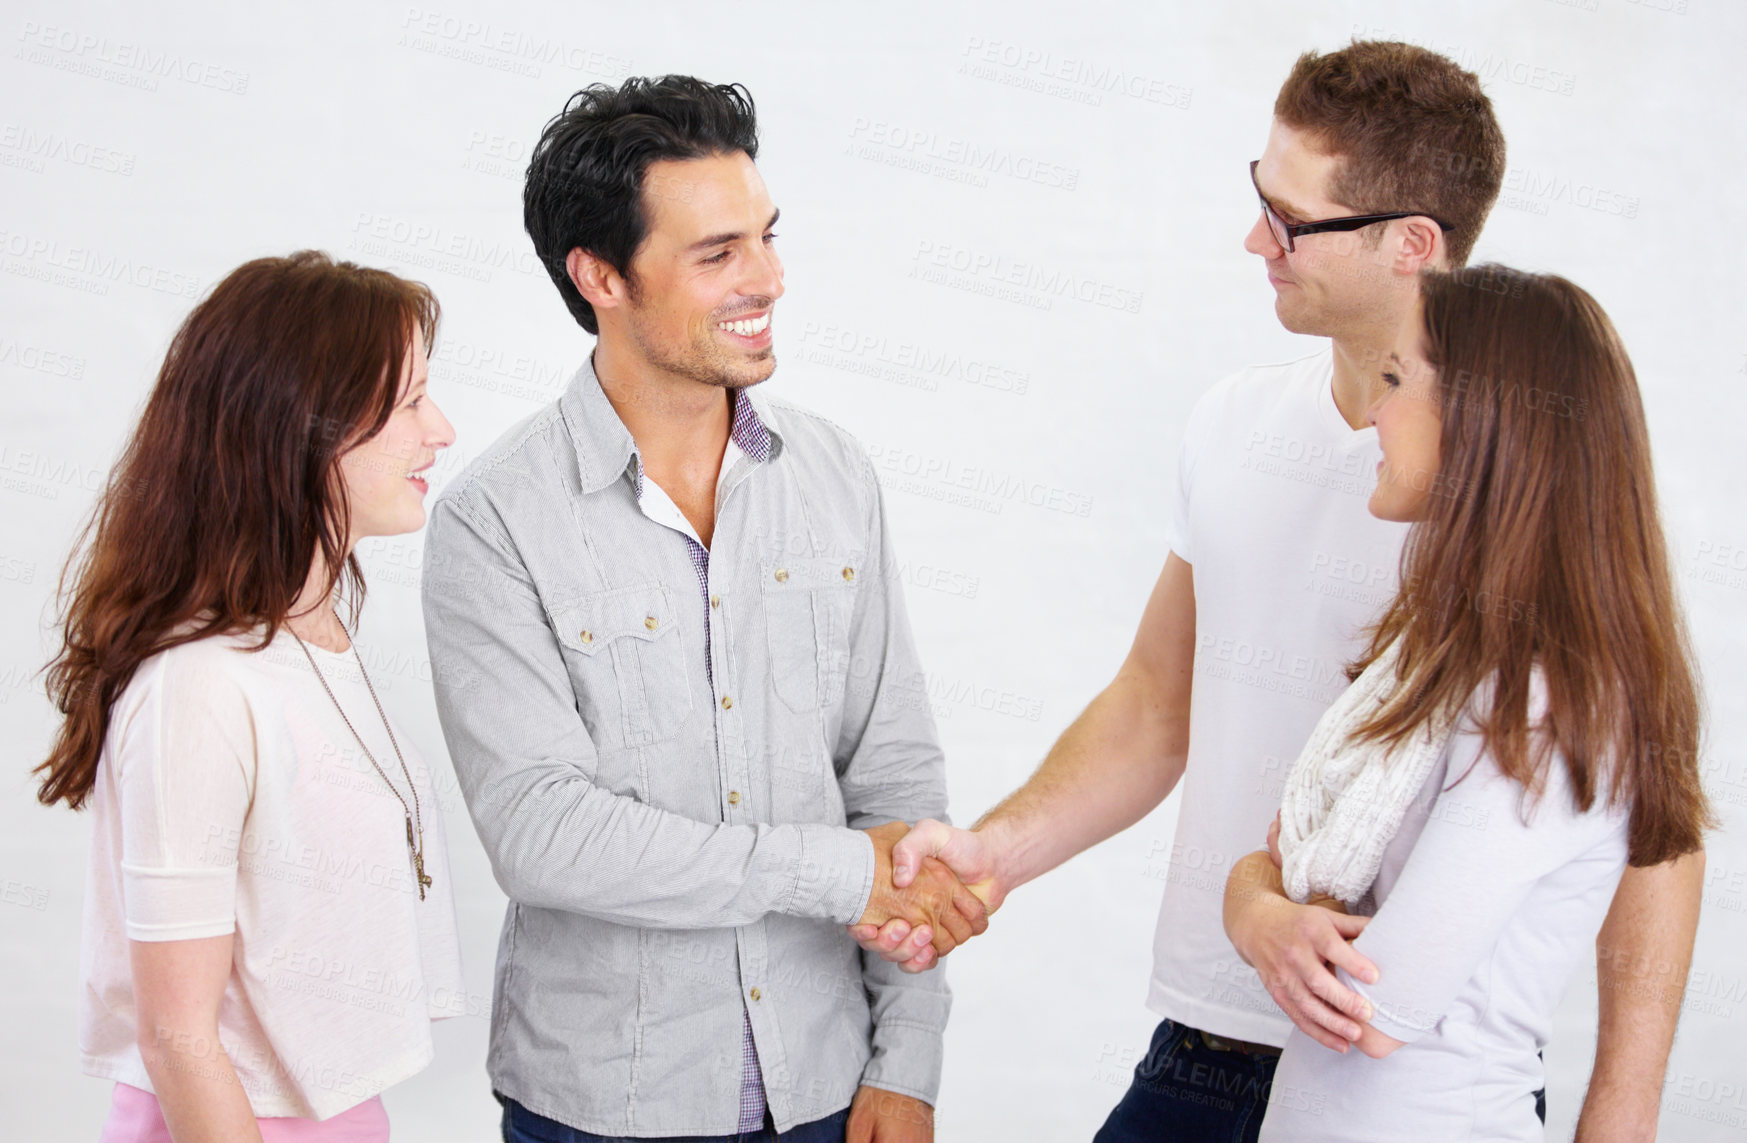 Buy stock photo Shot of a two young business professionals shaking hands while their coworkers look on